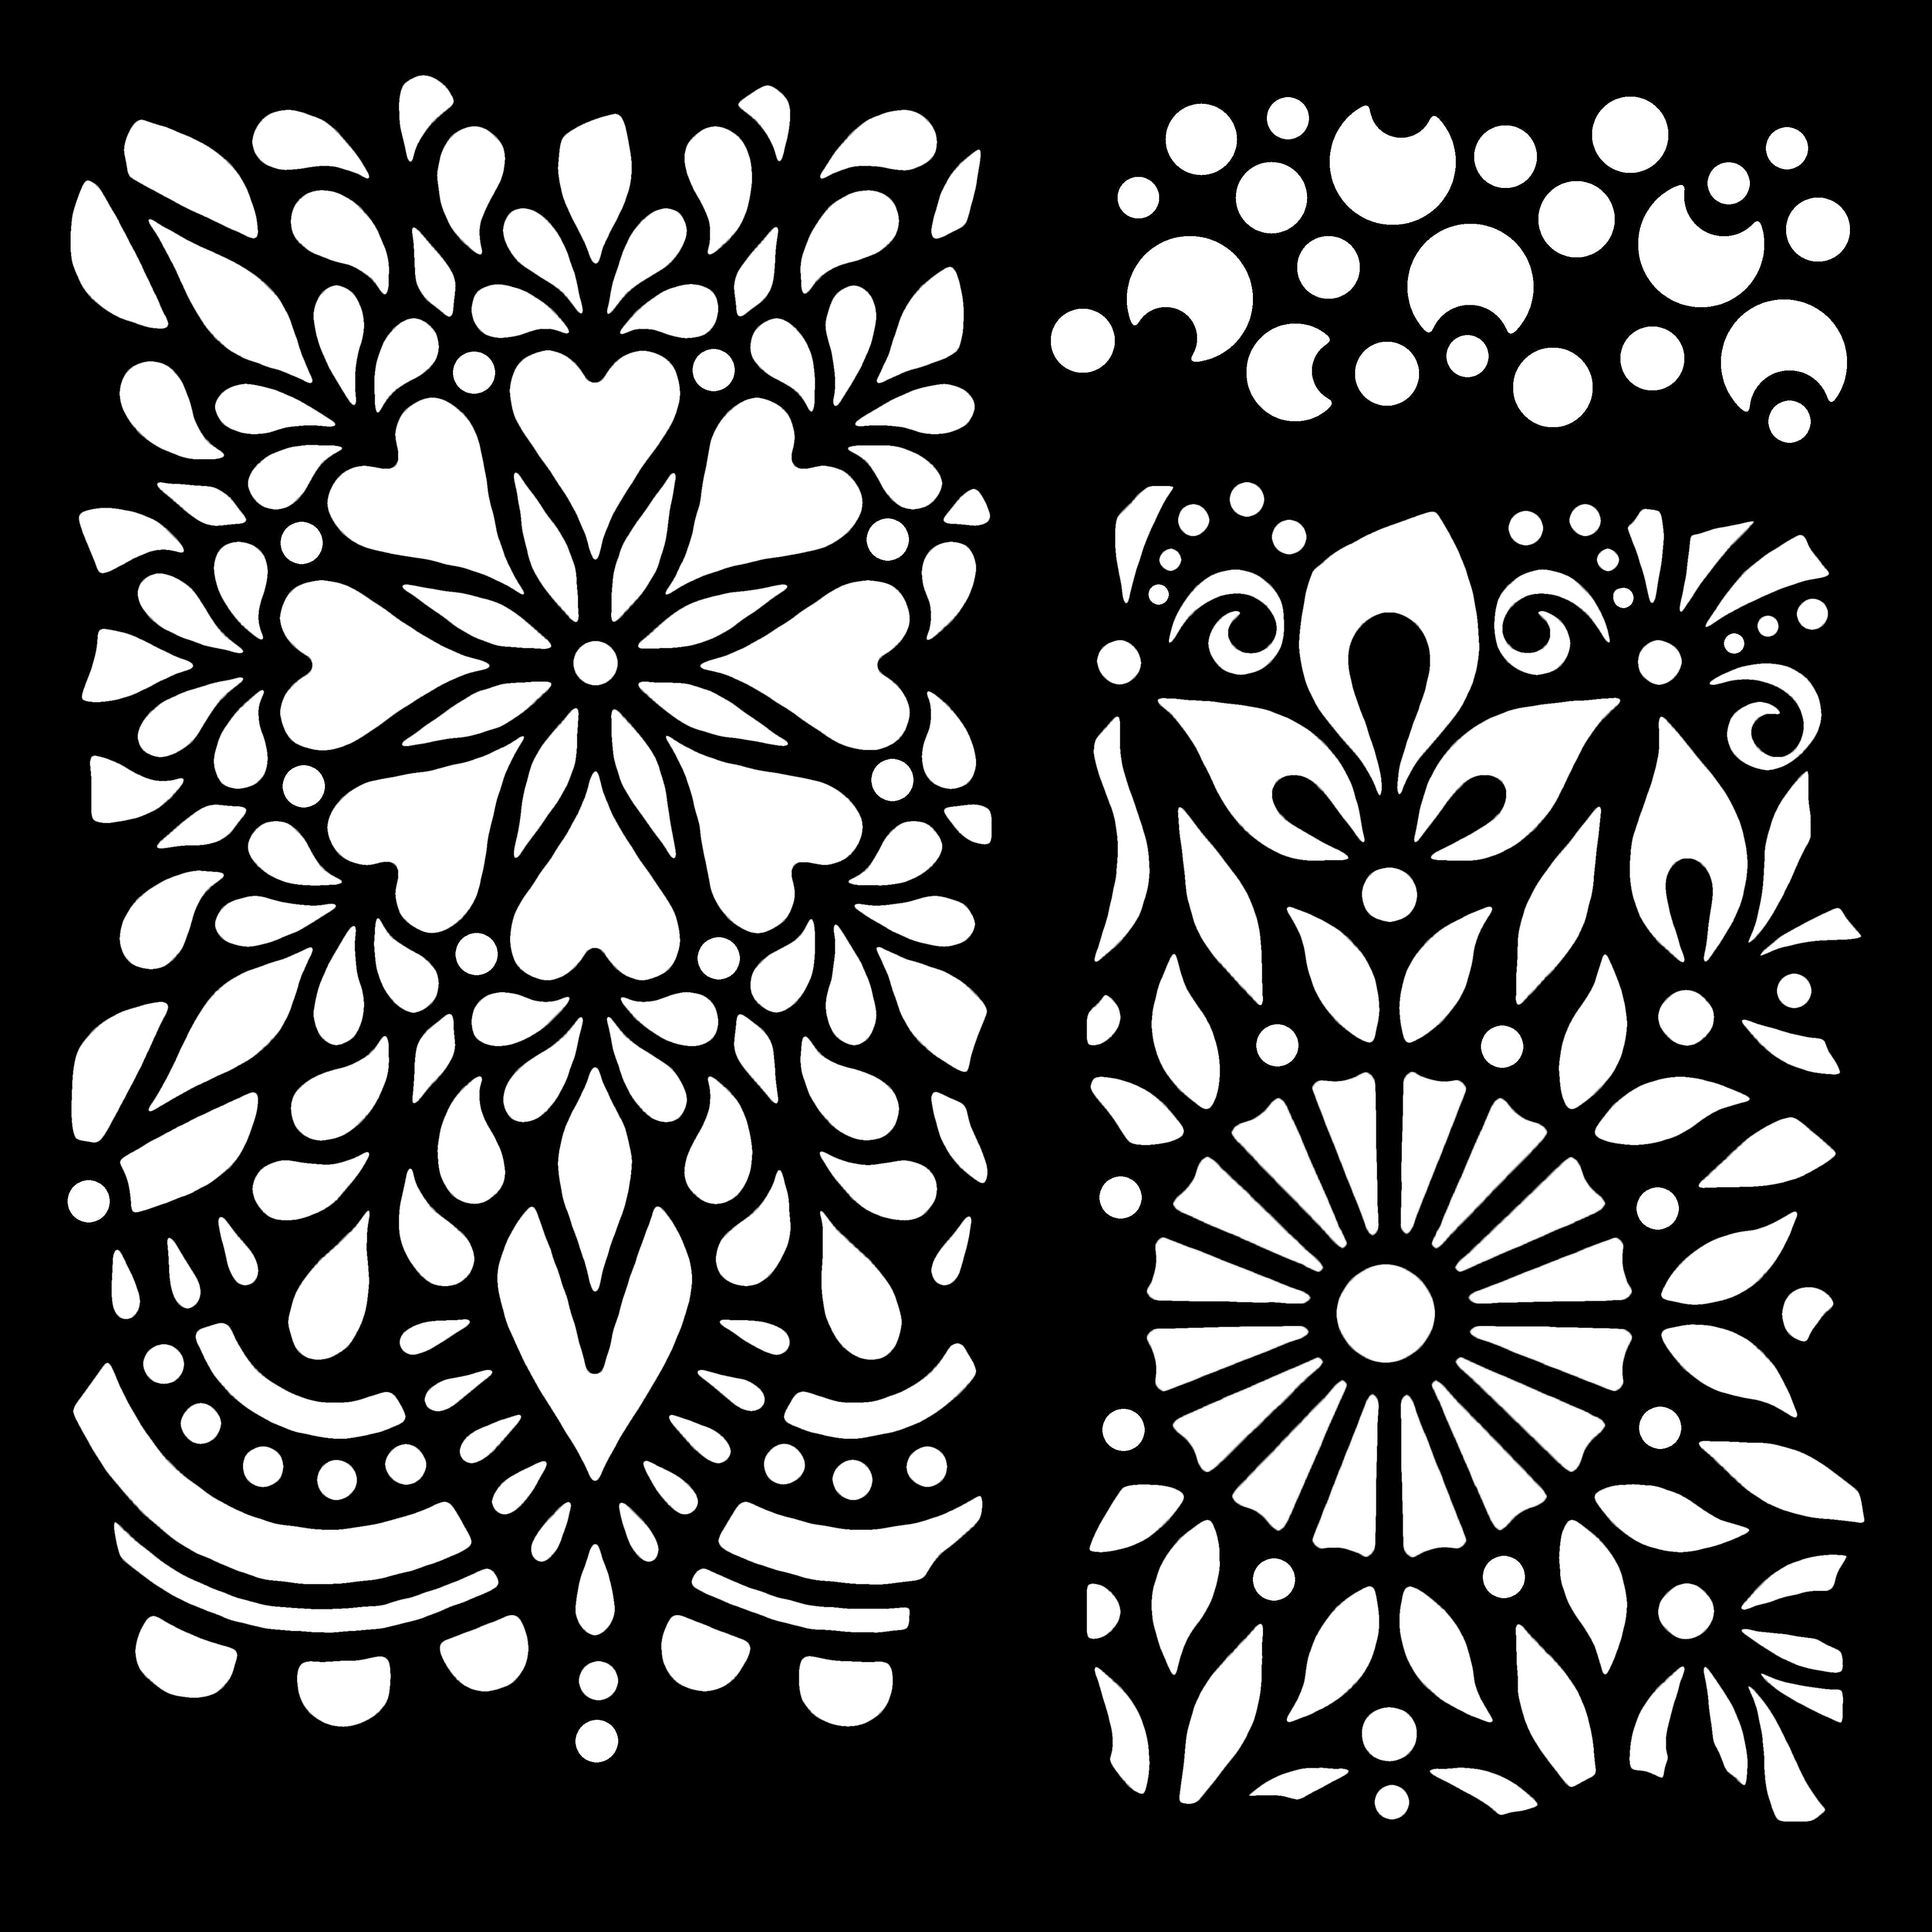 Woodware Floral Panels 6 in x 6 in Stencil